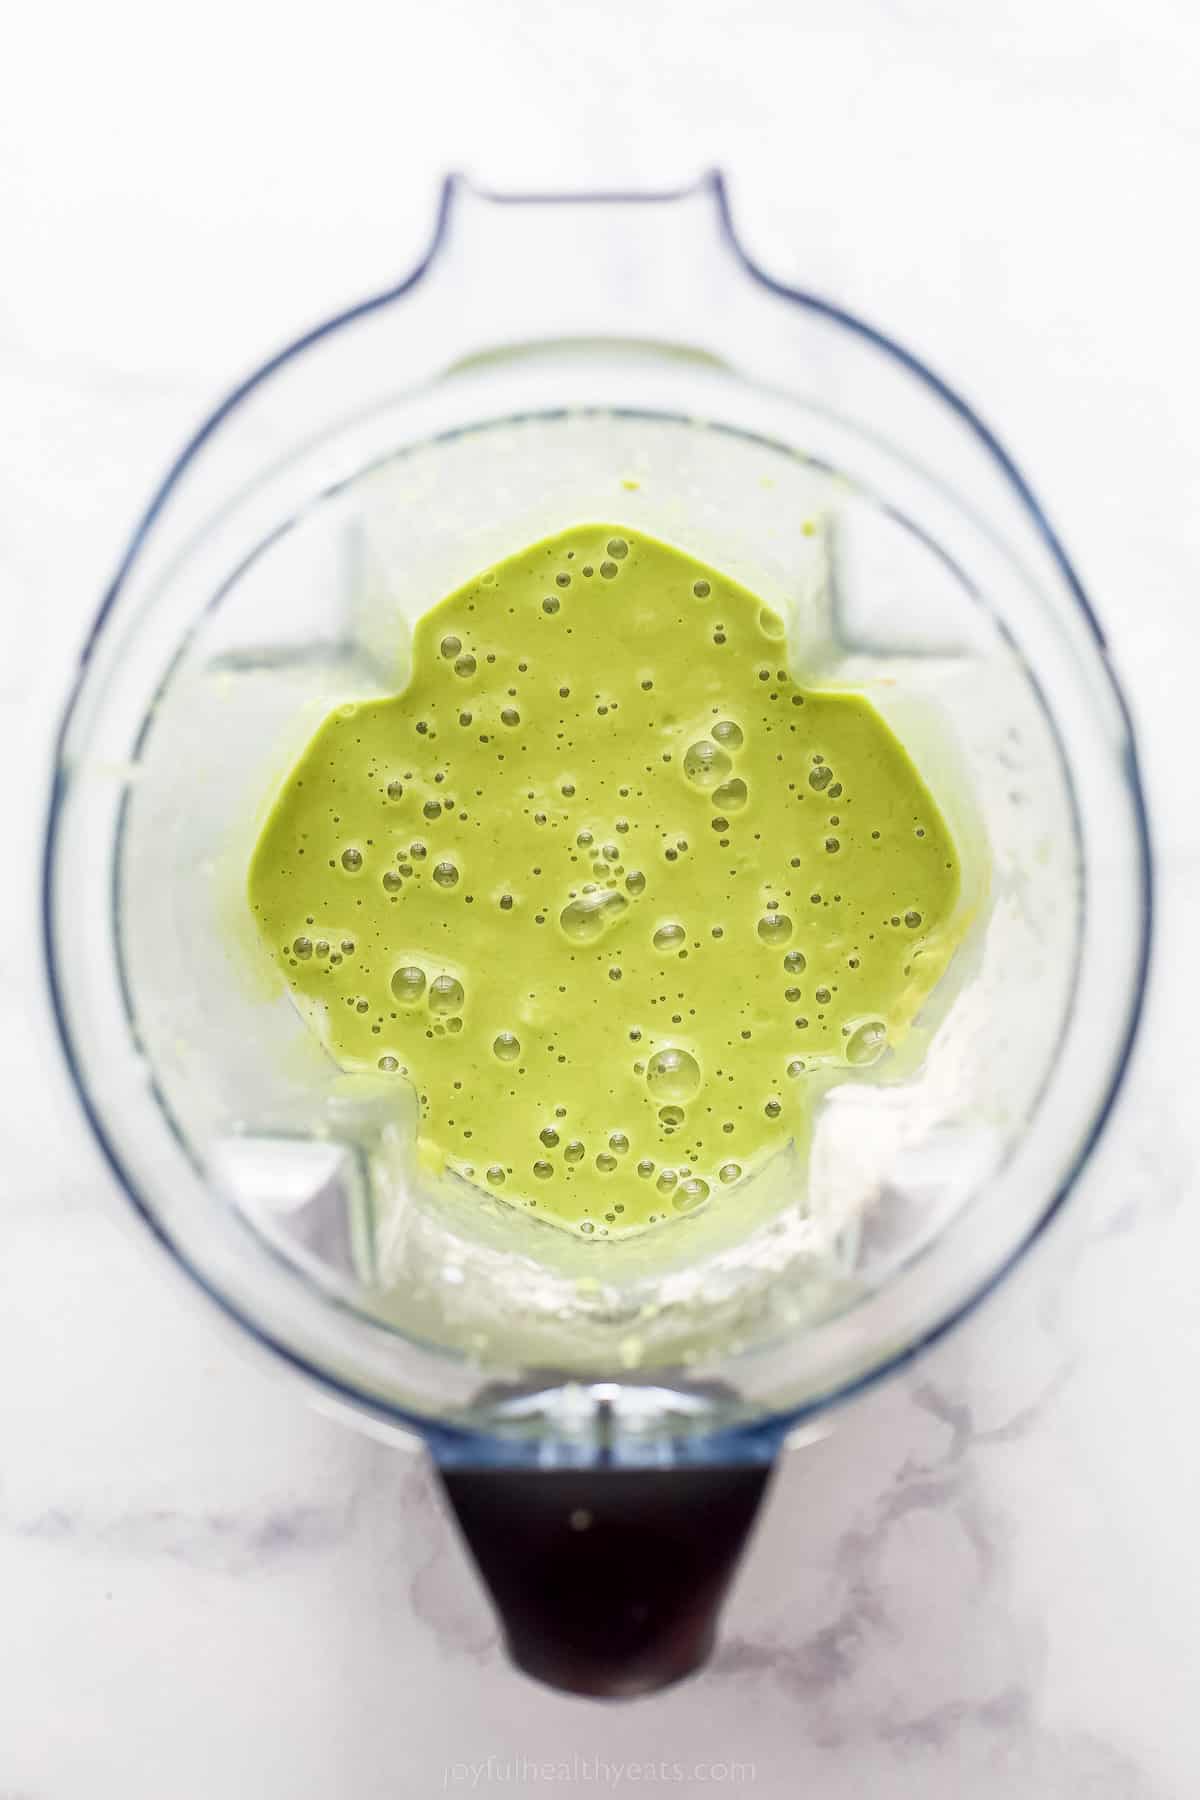 top view of a blender with a green smoothie in it